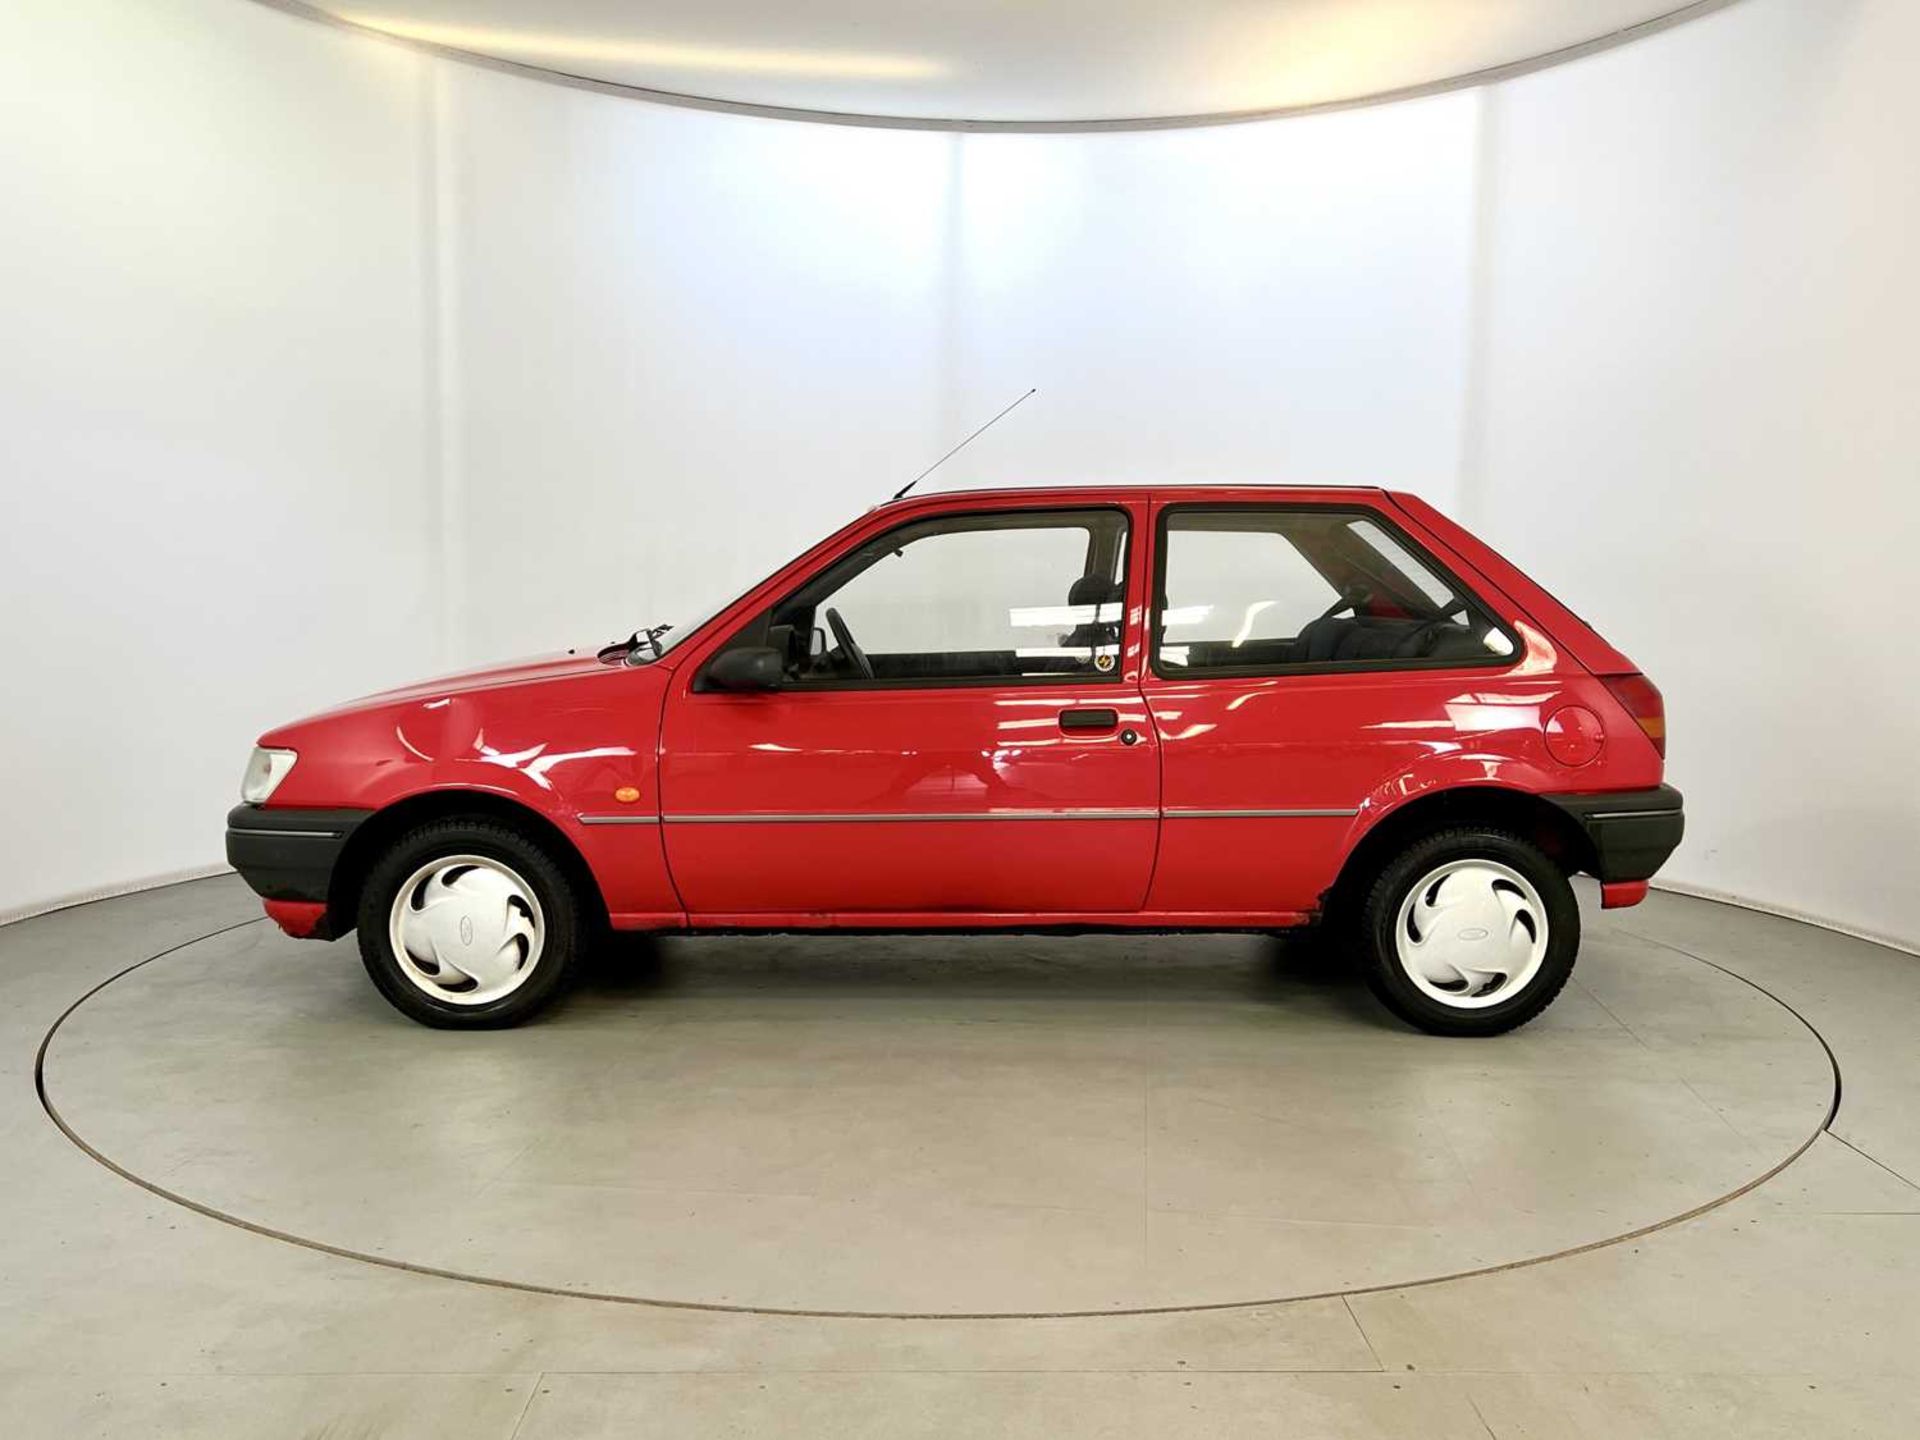 1994 Ford Fiesta Sapphire - Image 5 of 27